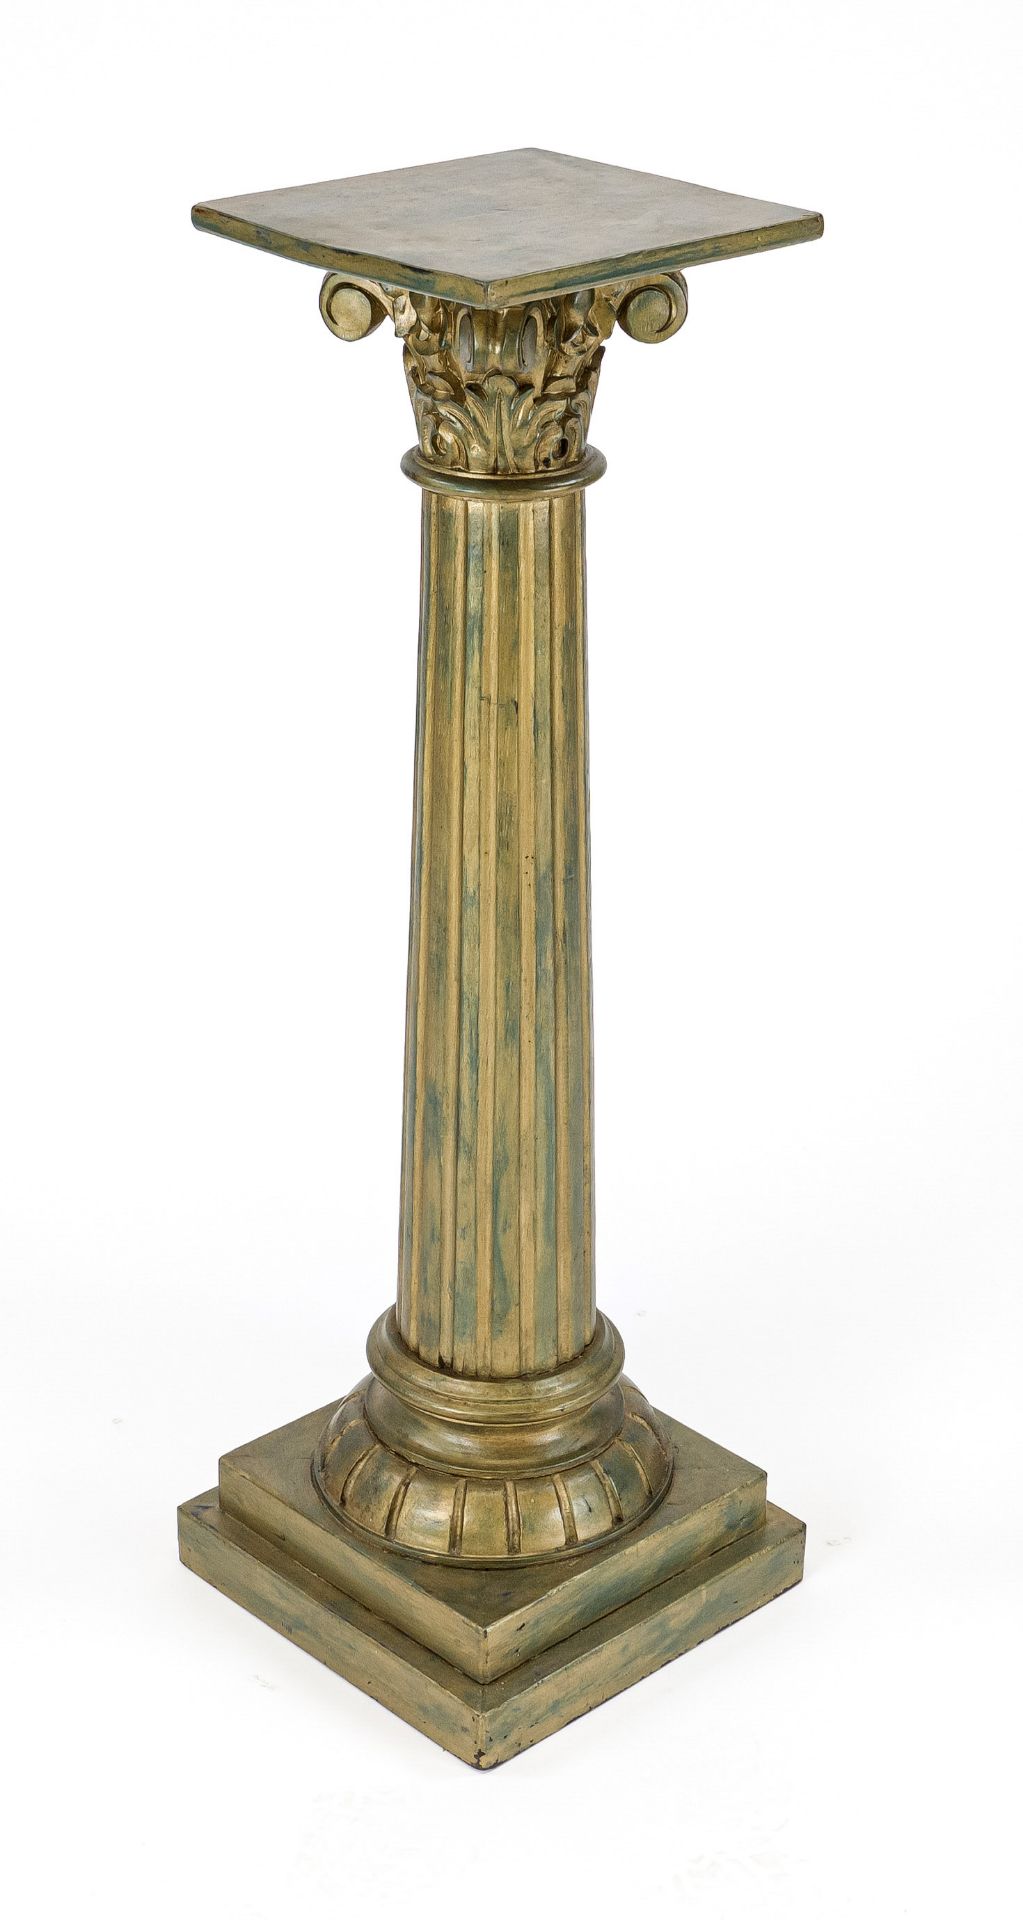 Floral column in Wilhelminian style, 20th century, wood painted greenish-gold, 98 x 26 x 26 cm